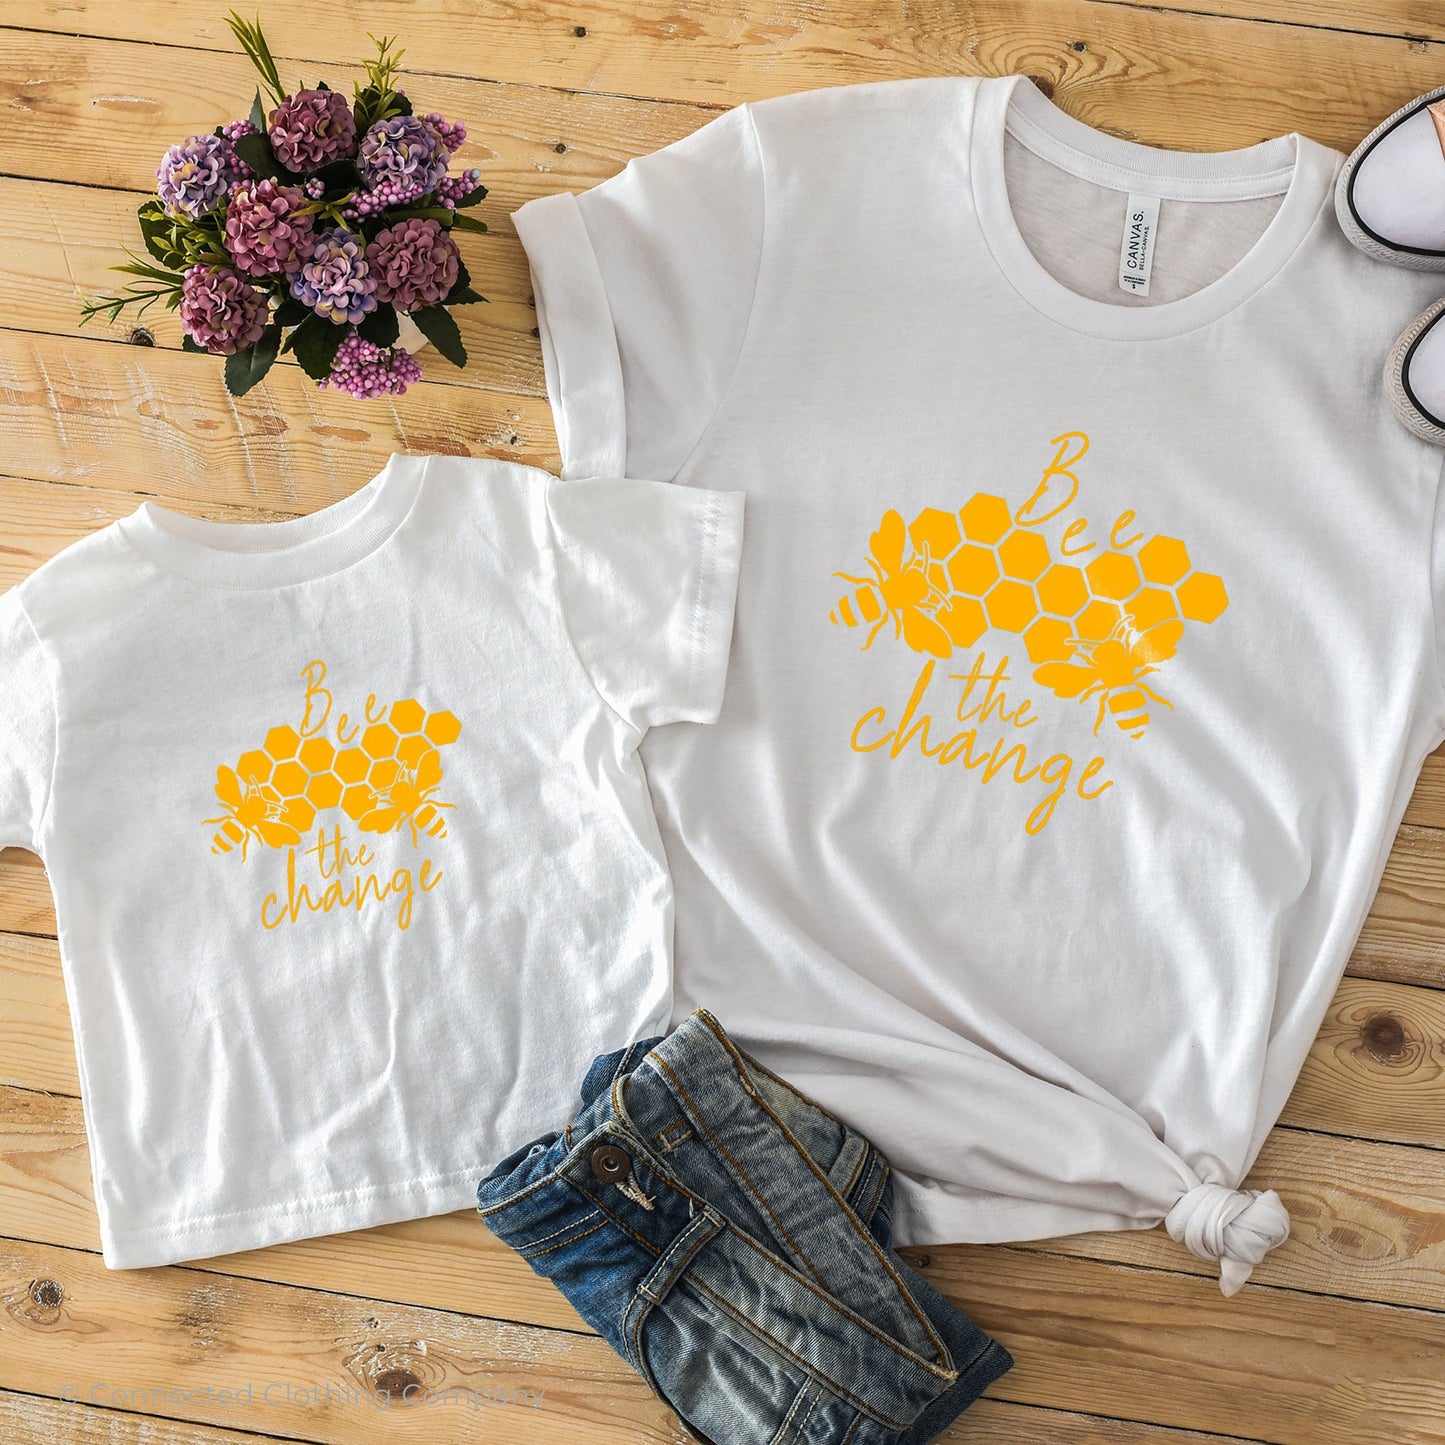 Bee The Change Toddler Short-Sleeve Tee in White with Adult Bee The Change Tee - sweetsherriloudesigns - 10% of profits donated to The Honeybee Conservancy, supporting bee conservation and building bee habitats